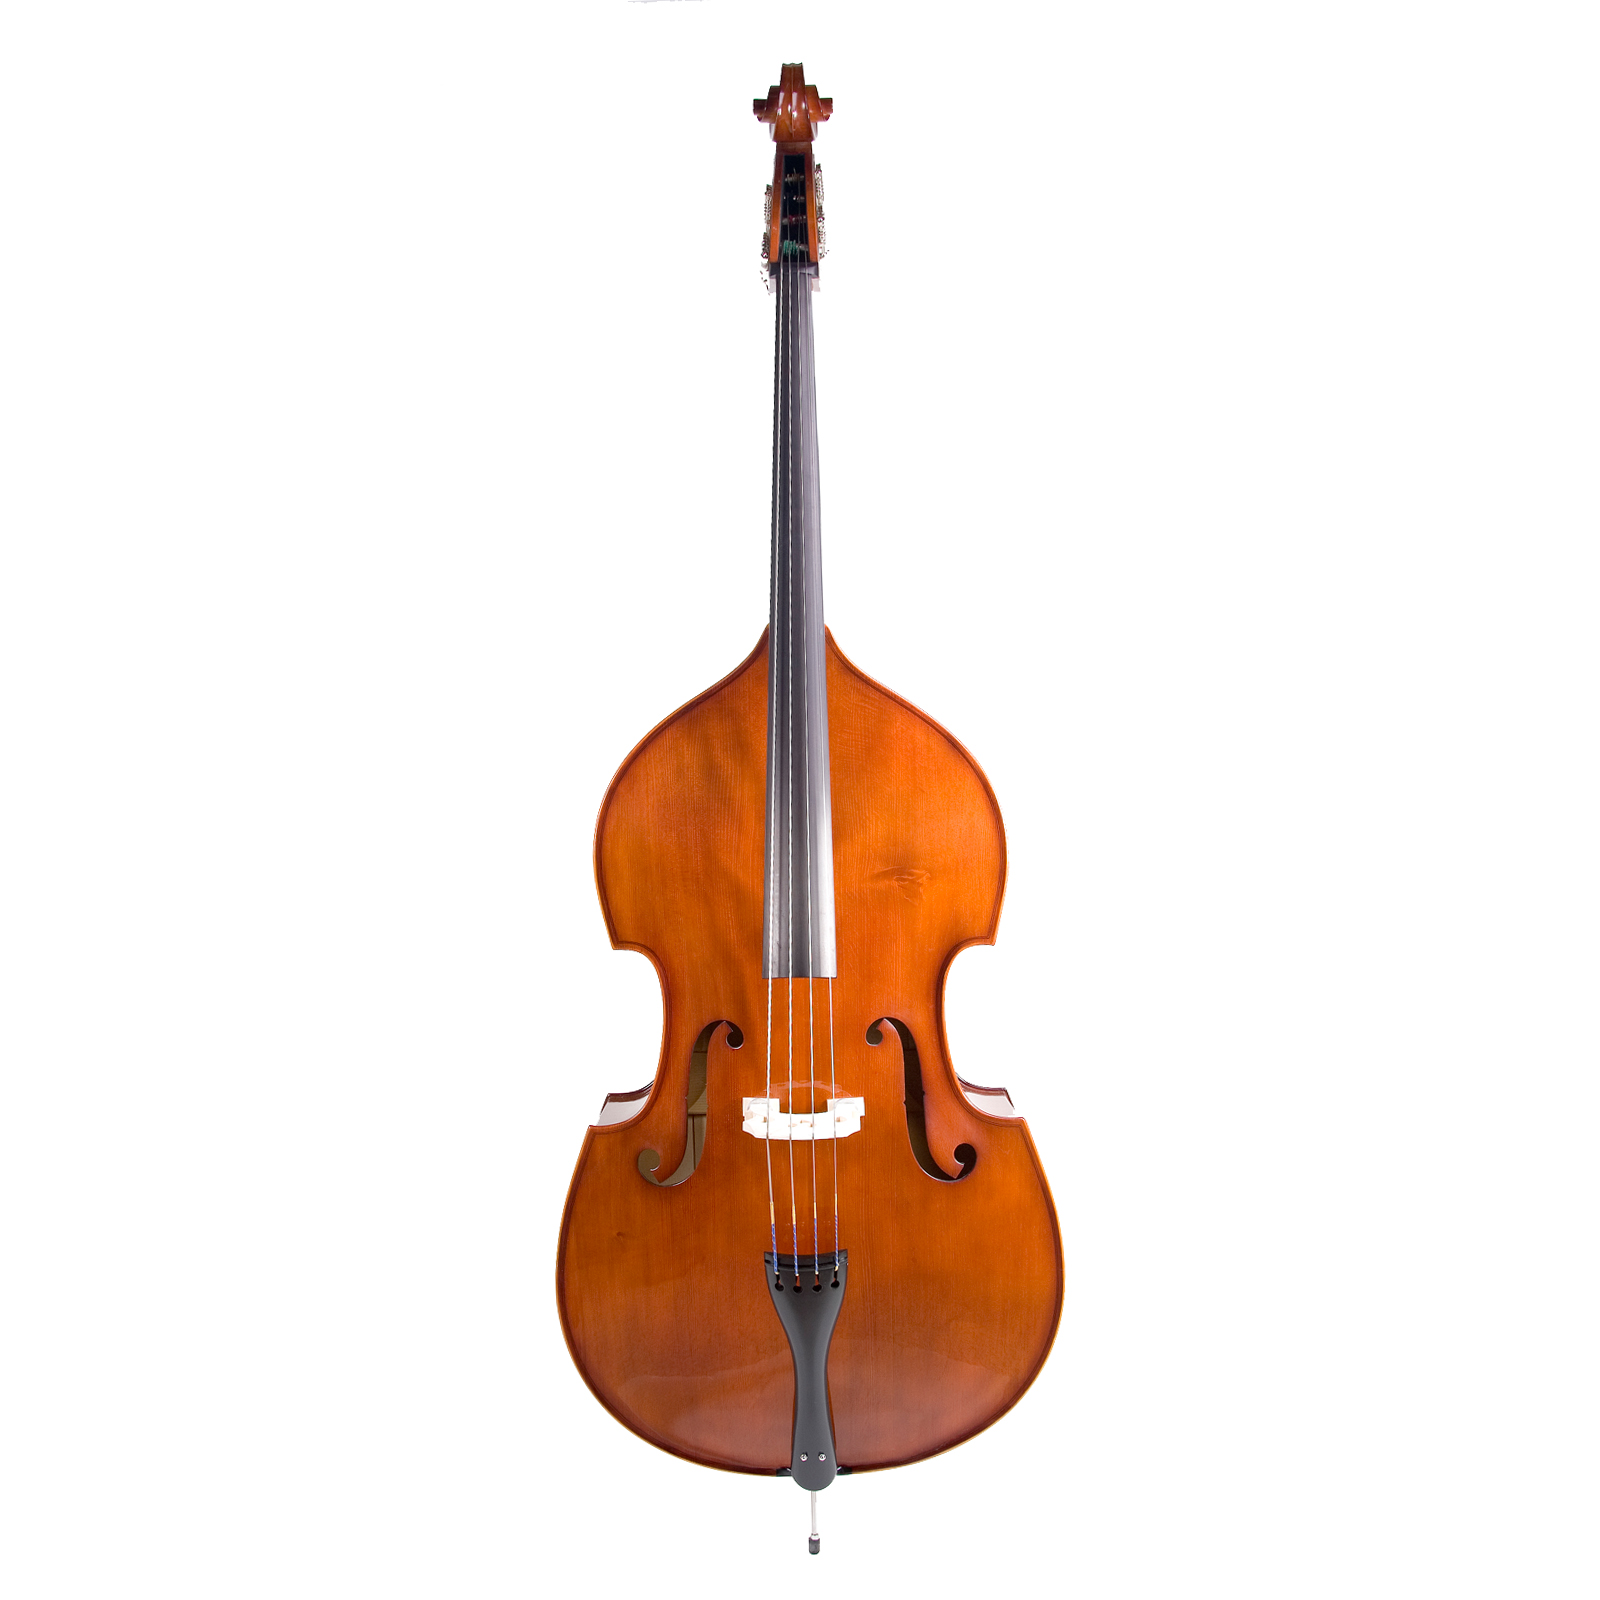 Double Bass Pictures - ClipArt Best